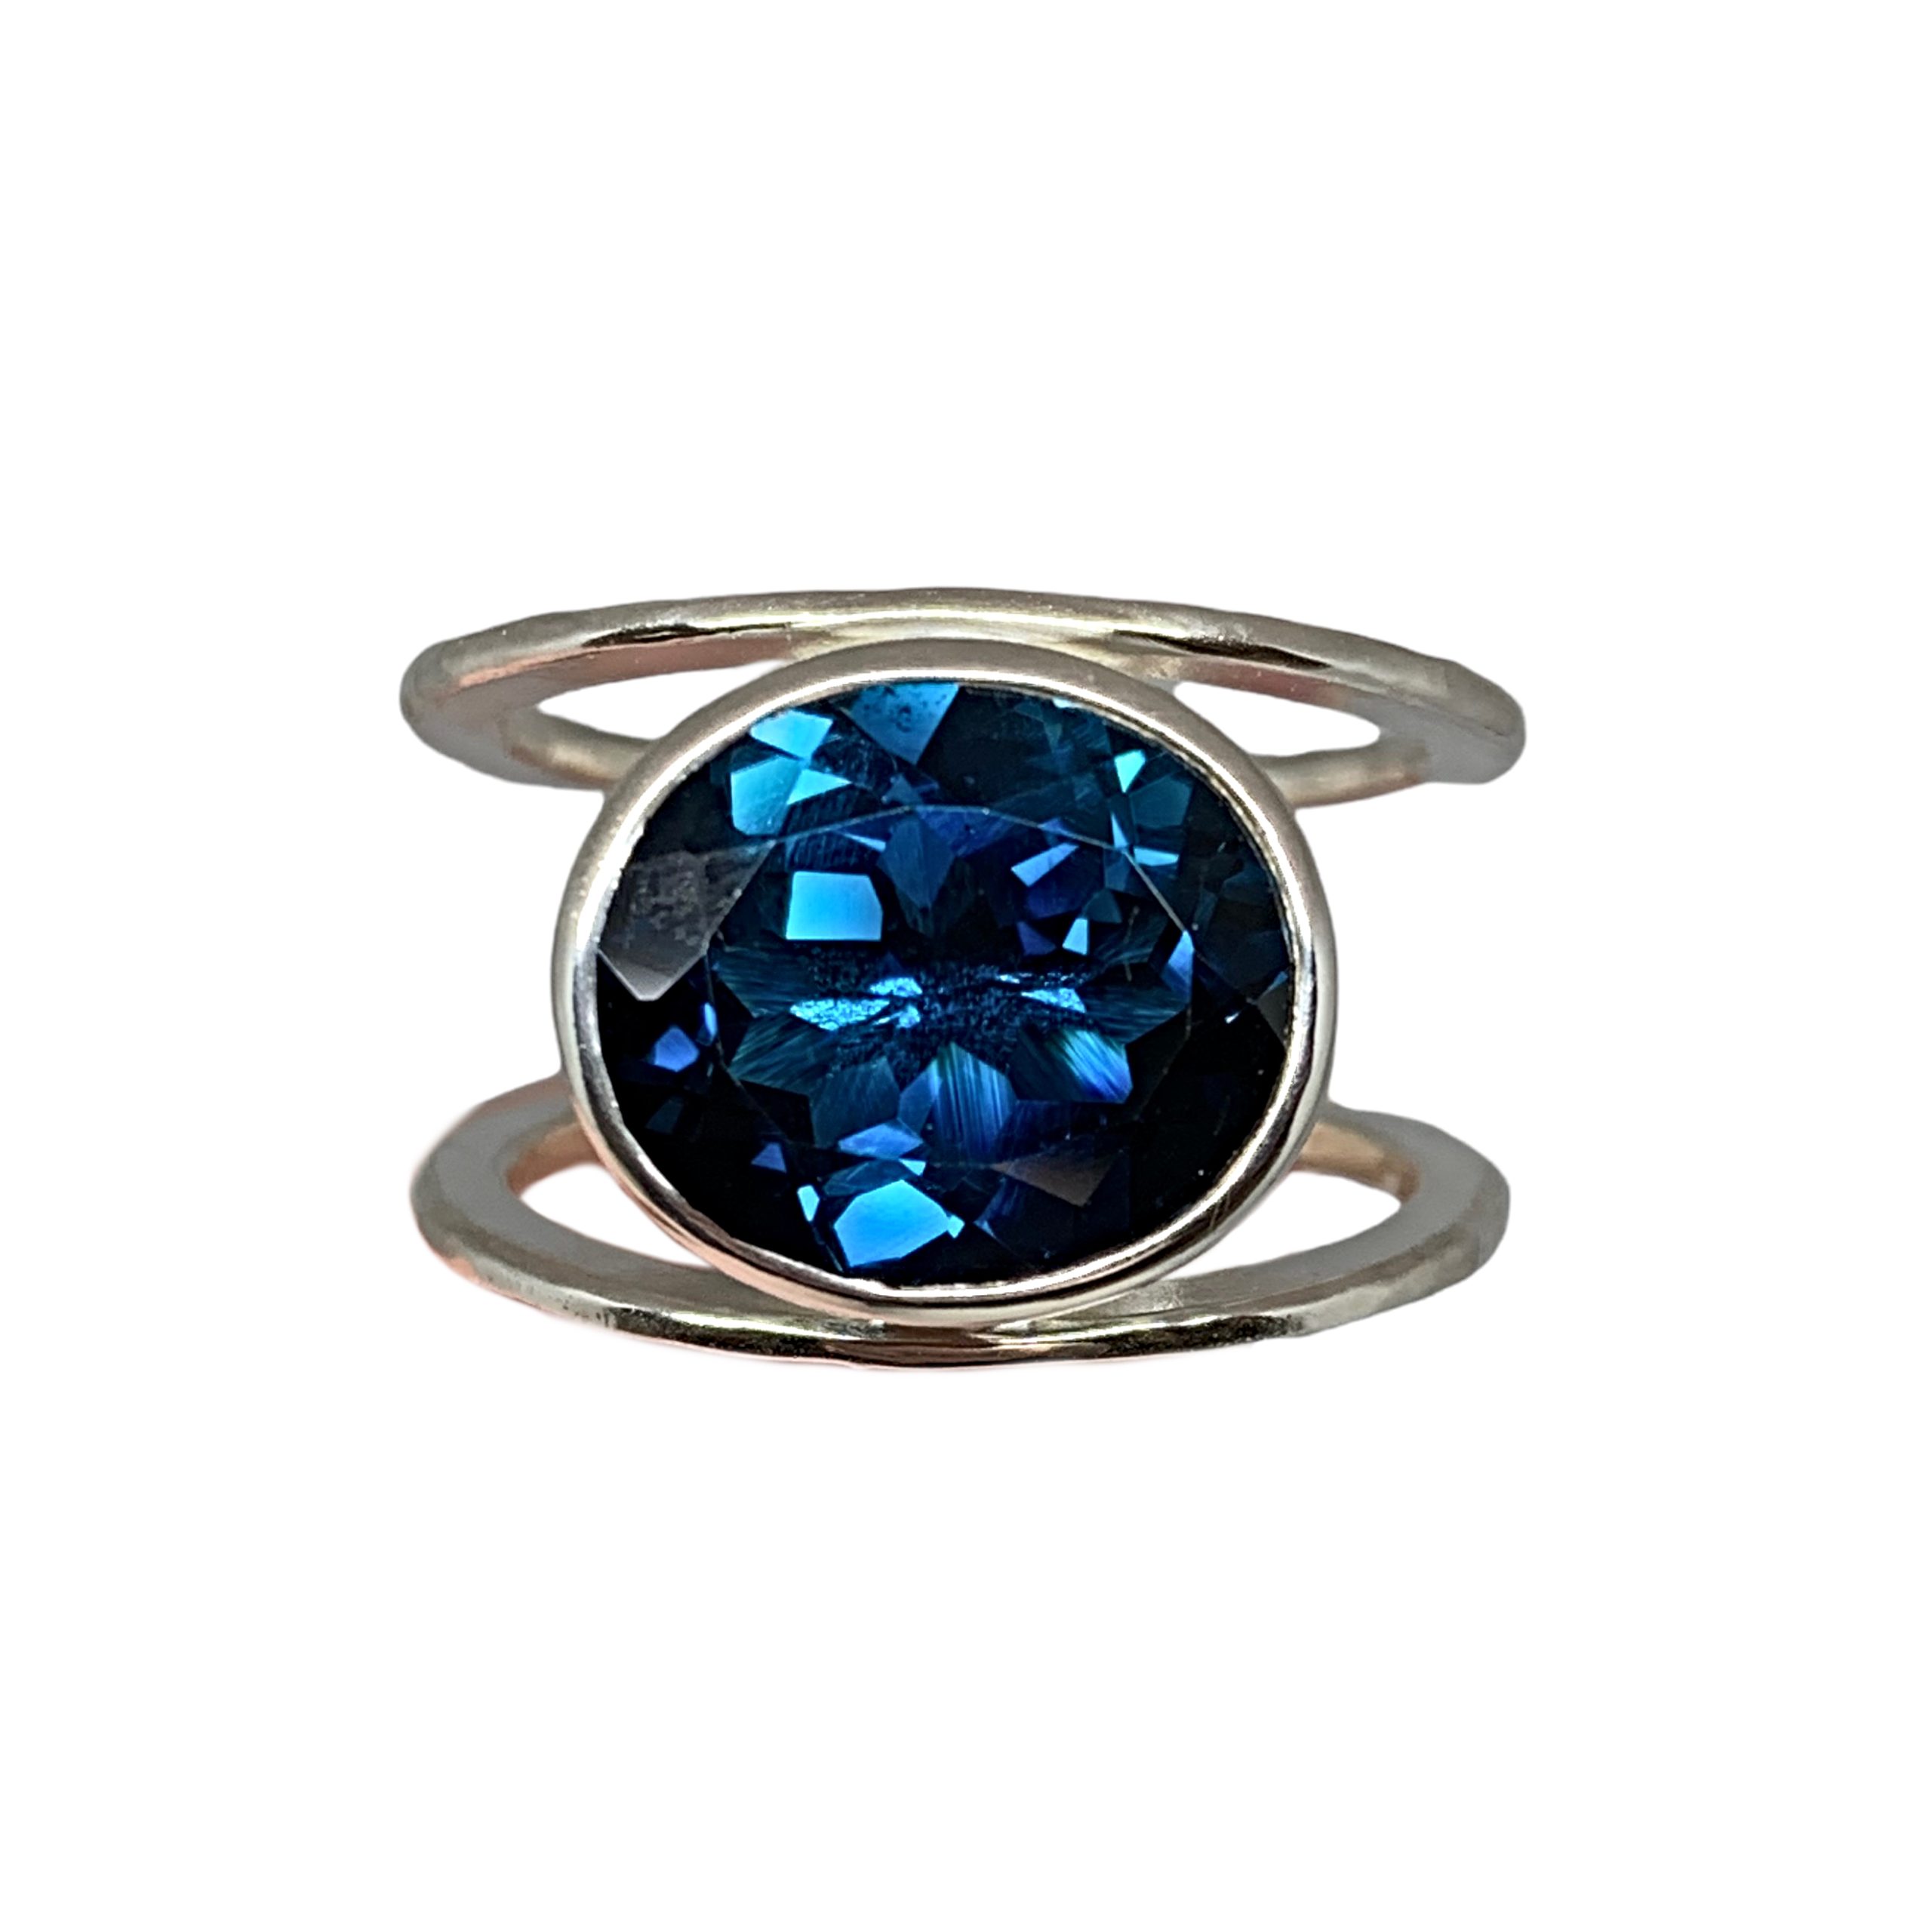 Locally handmade silver + London blue topaz ring by A&R Jewellery | Effusion Art Gallery + Cast Glass Studio, Invermere BC